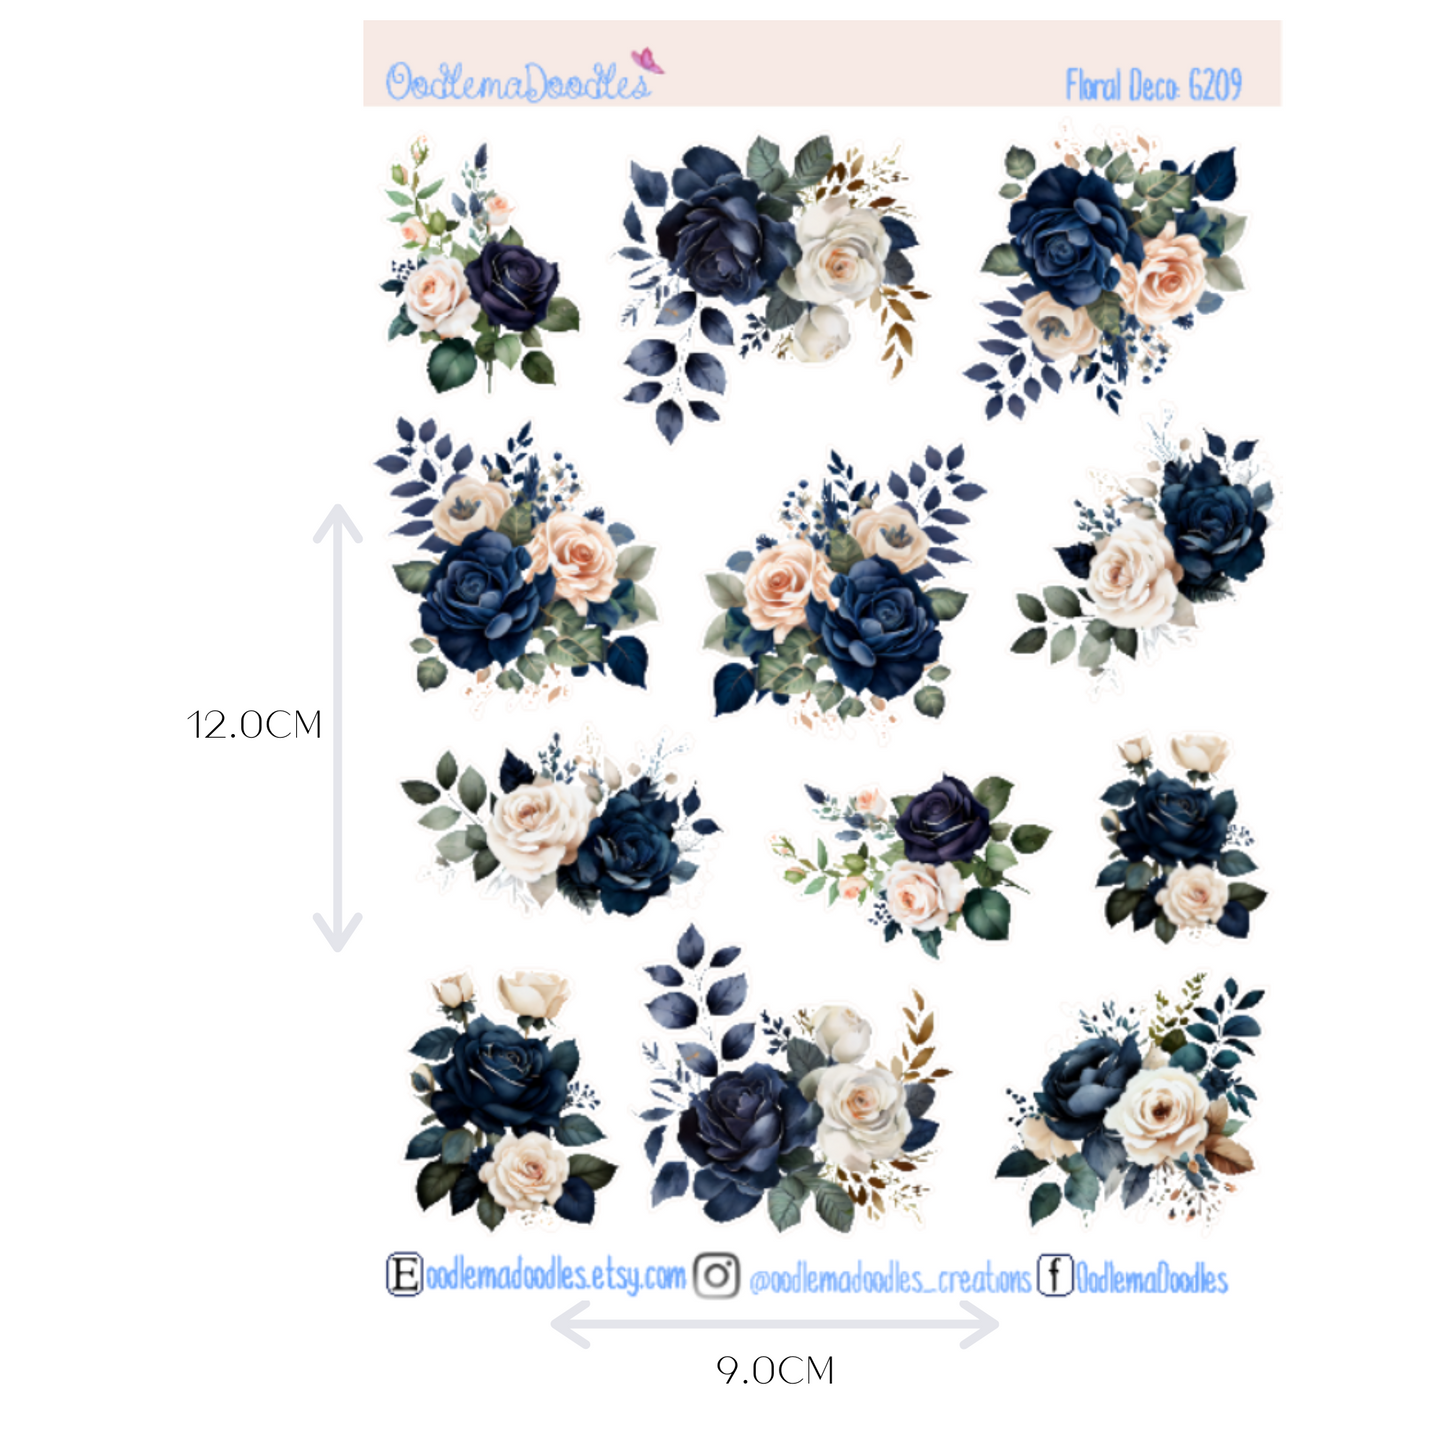 Winter Amour Floral Decorative Stickers